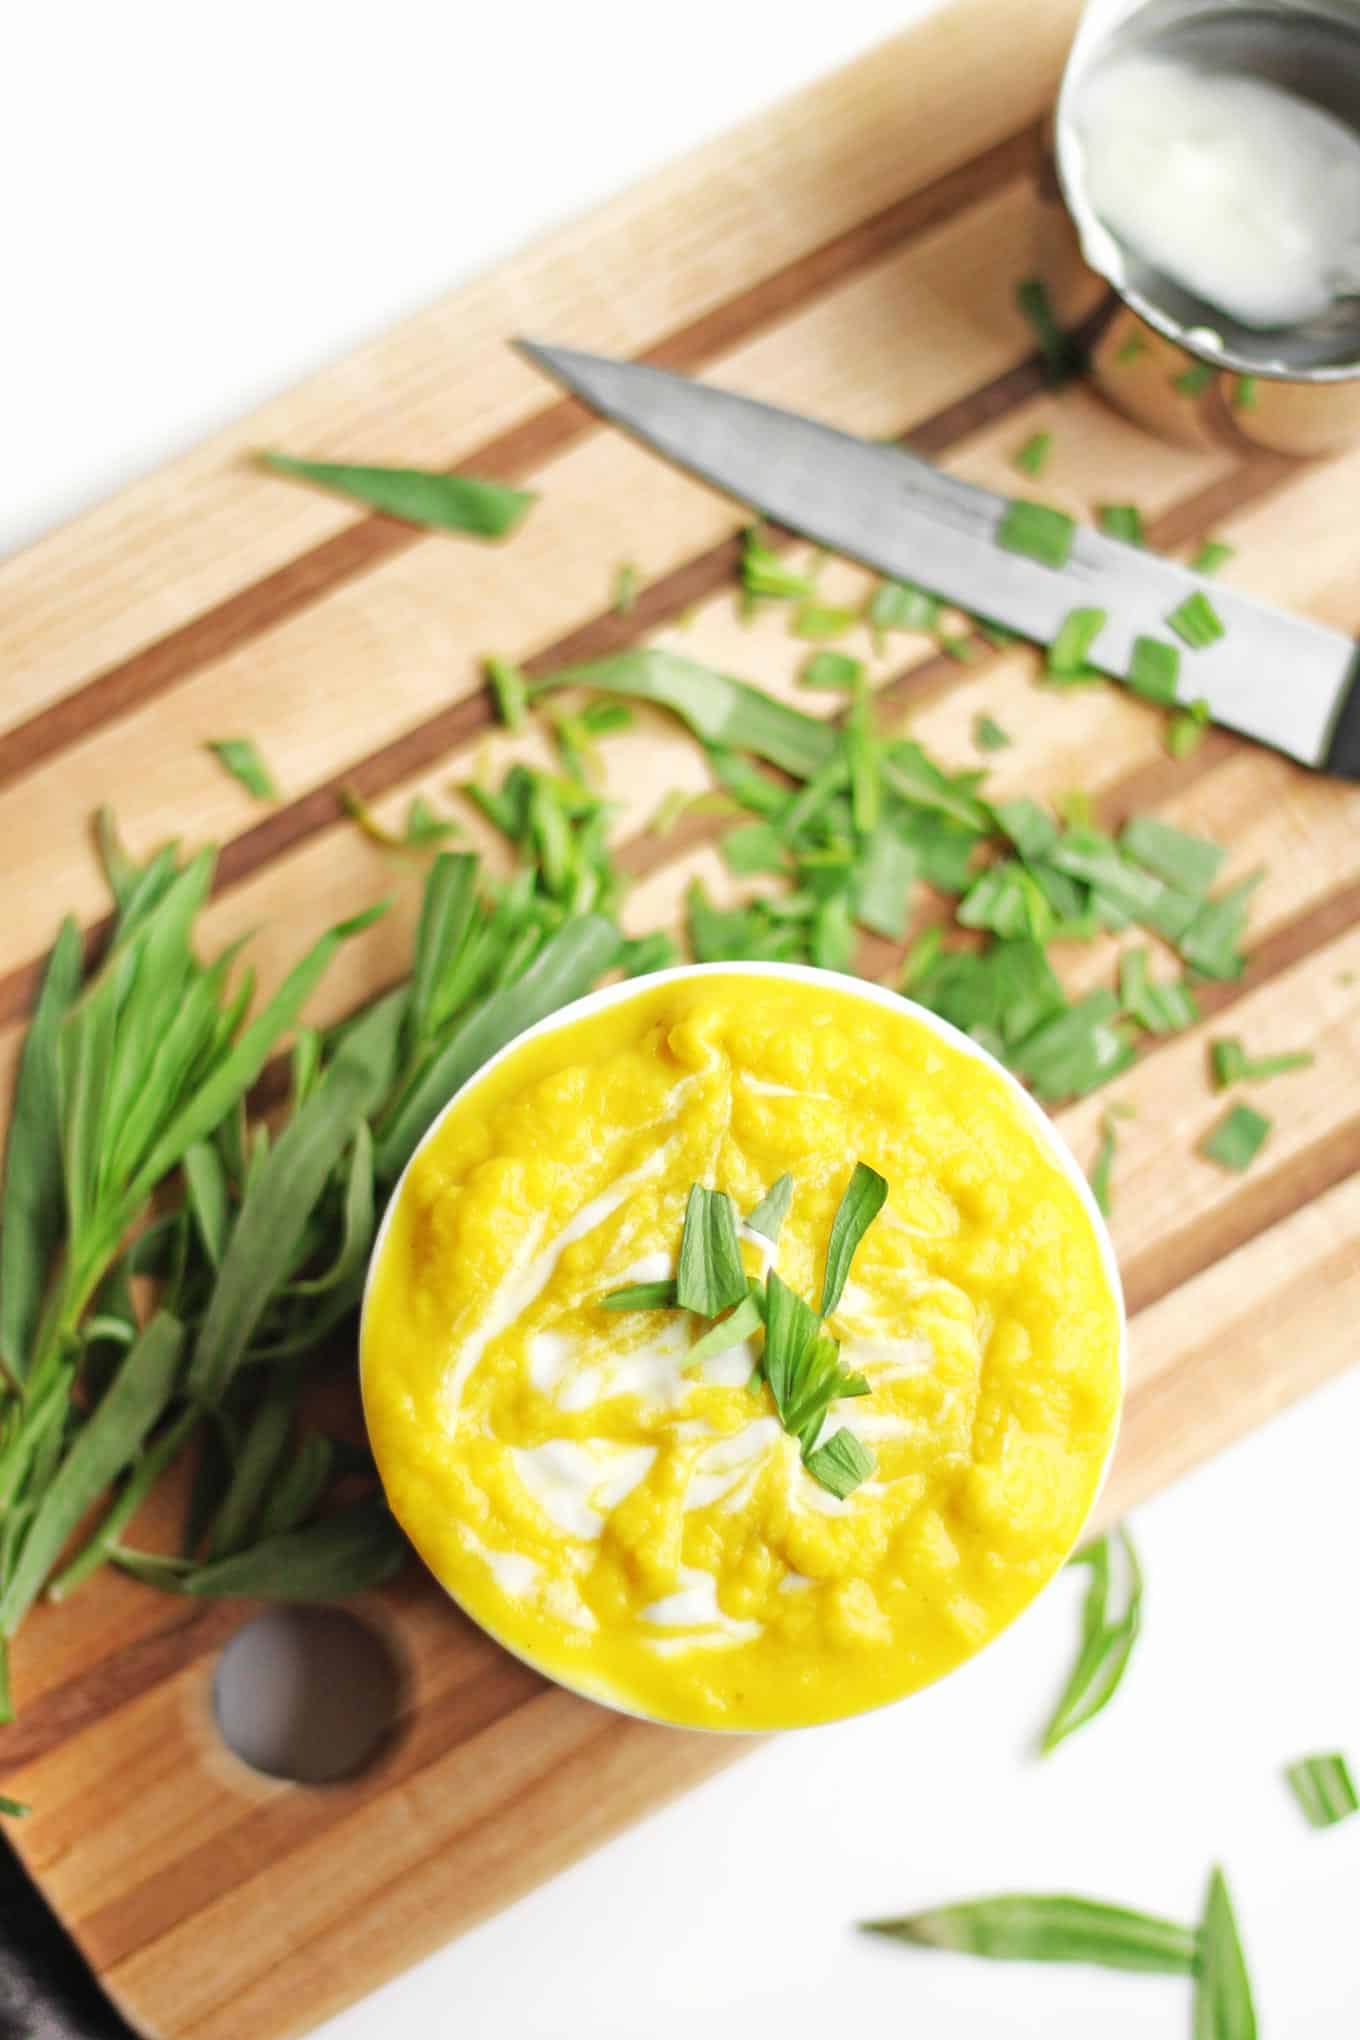 Golden beet puree with tarragon and yogurt! An easy and healthy homemade baby food recipe that is sure to please your little one. YUM! // Rhubarbarians